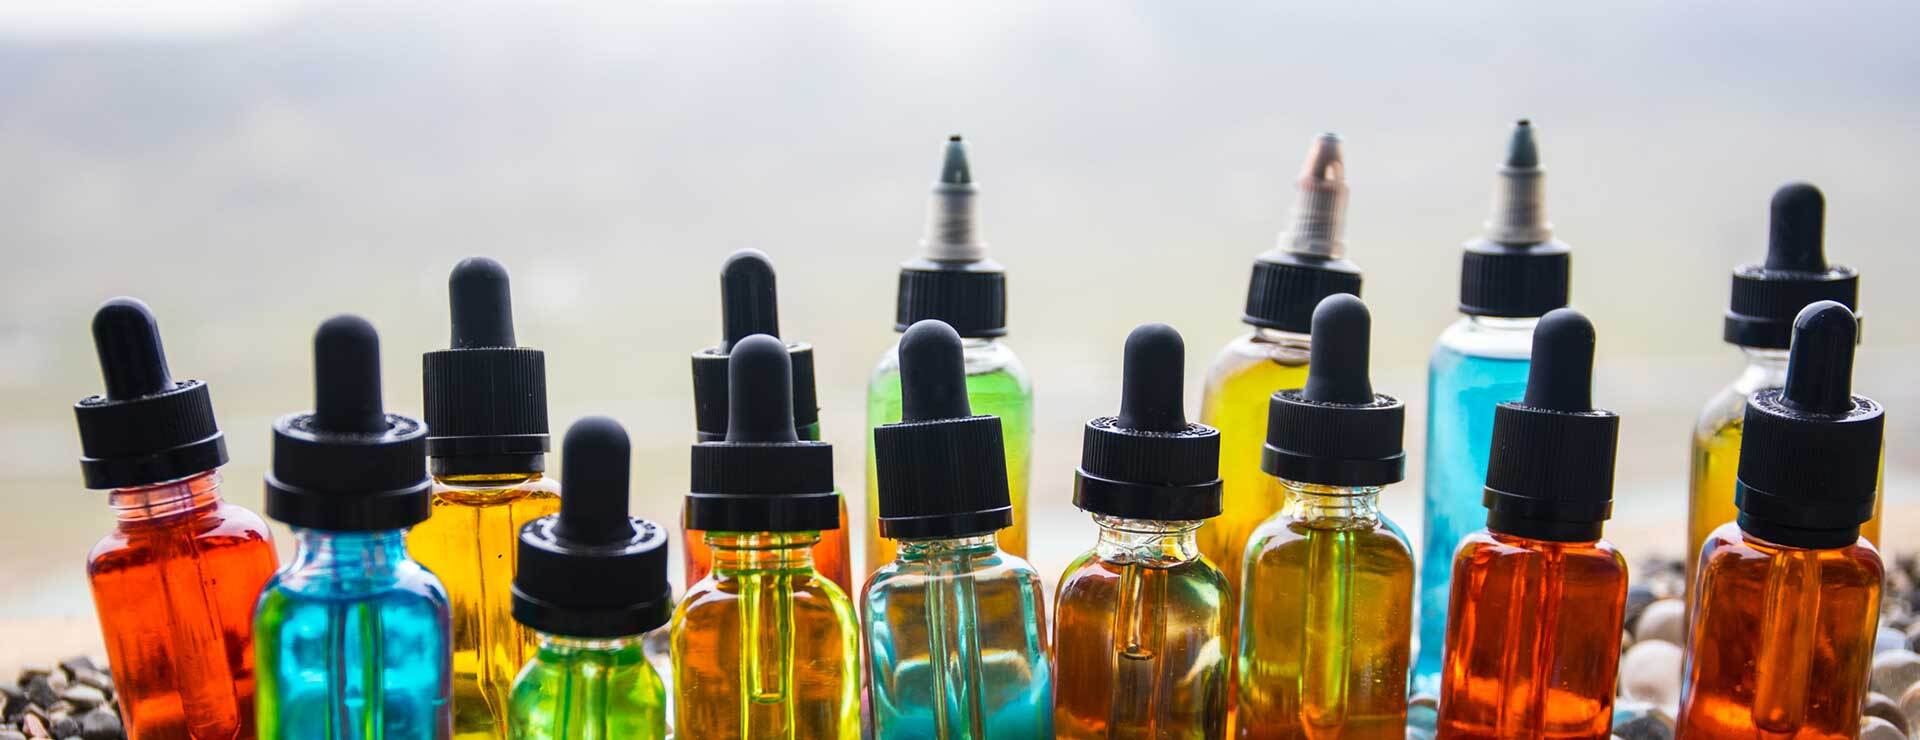 Vape Flavors And Vape Juice What You Need To Know Johns Hopkins Medicine